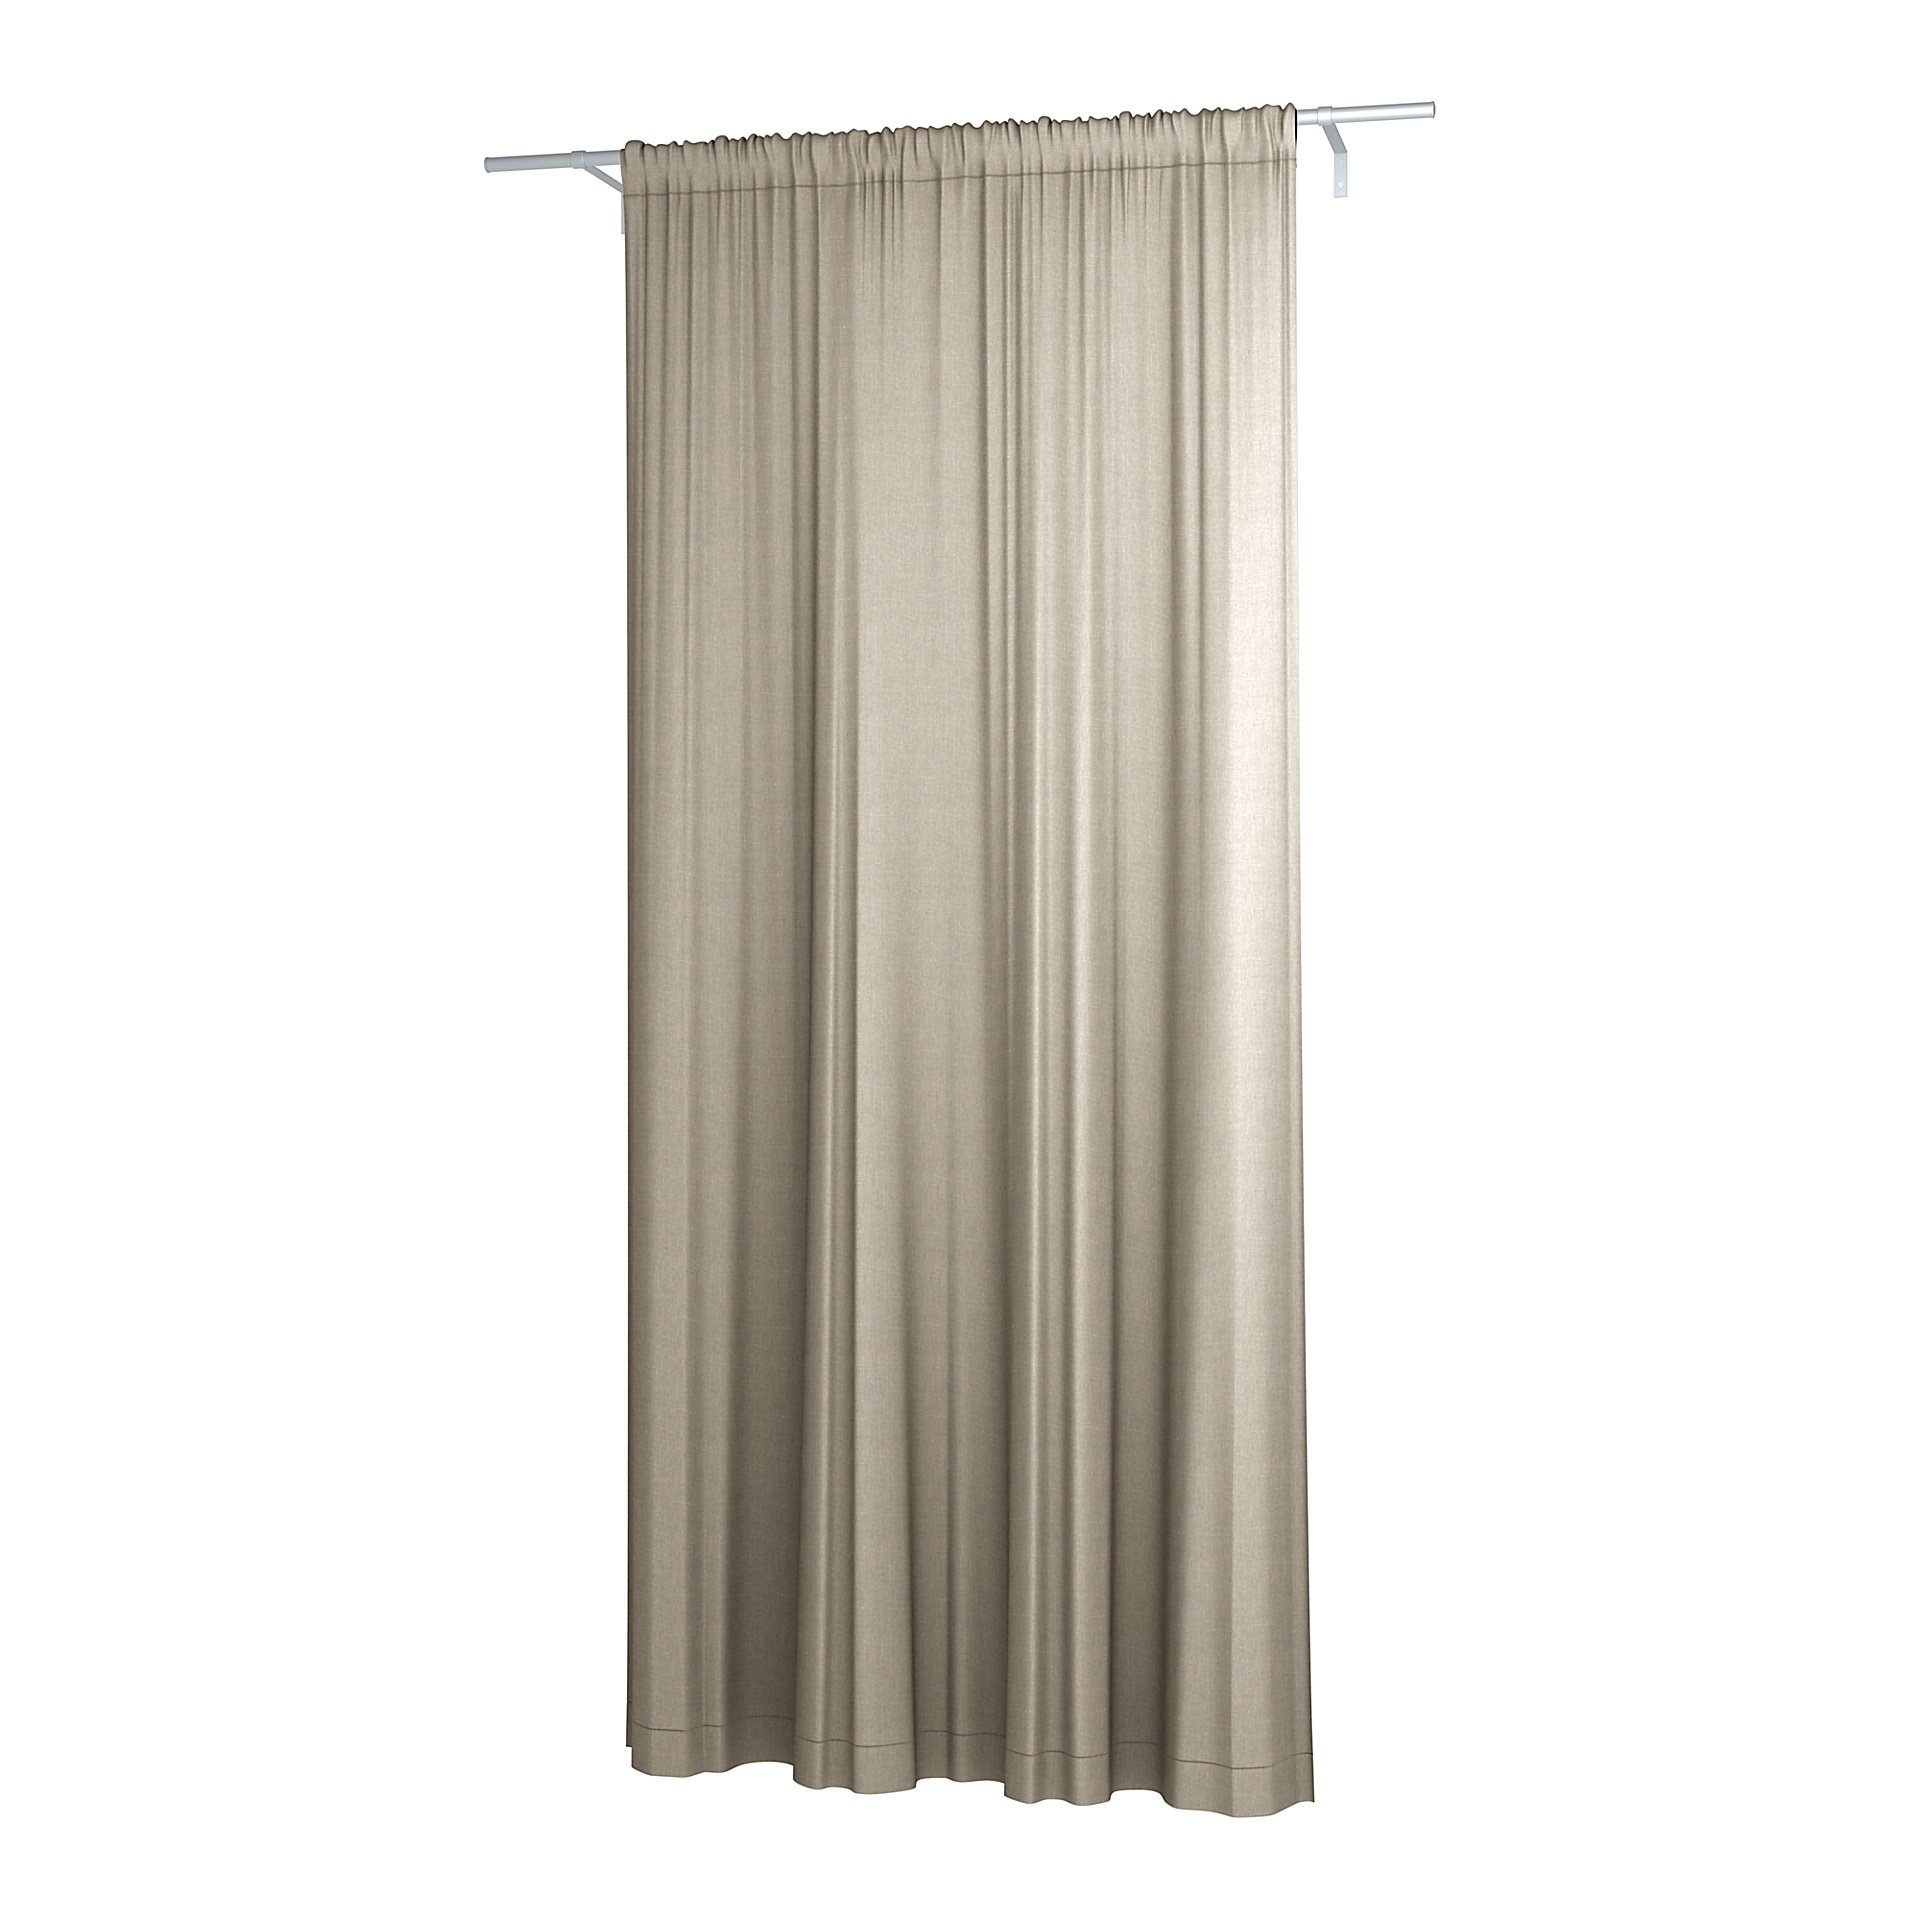 Double Width Curtain Panel with Tunnel/Creaseband, 250 cm, Natural, Linen - Bemz